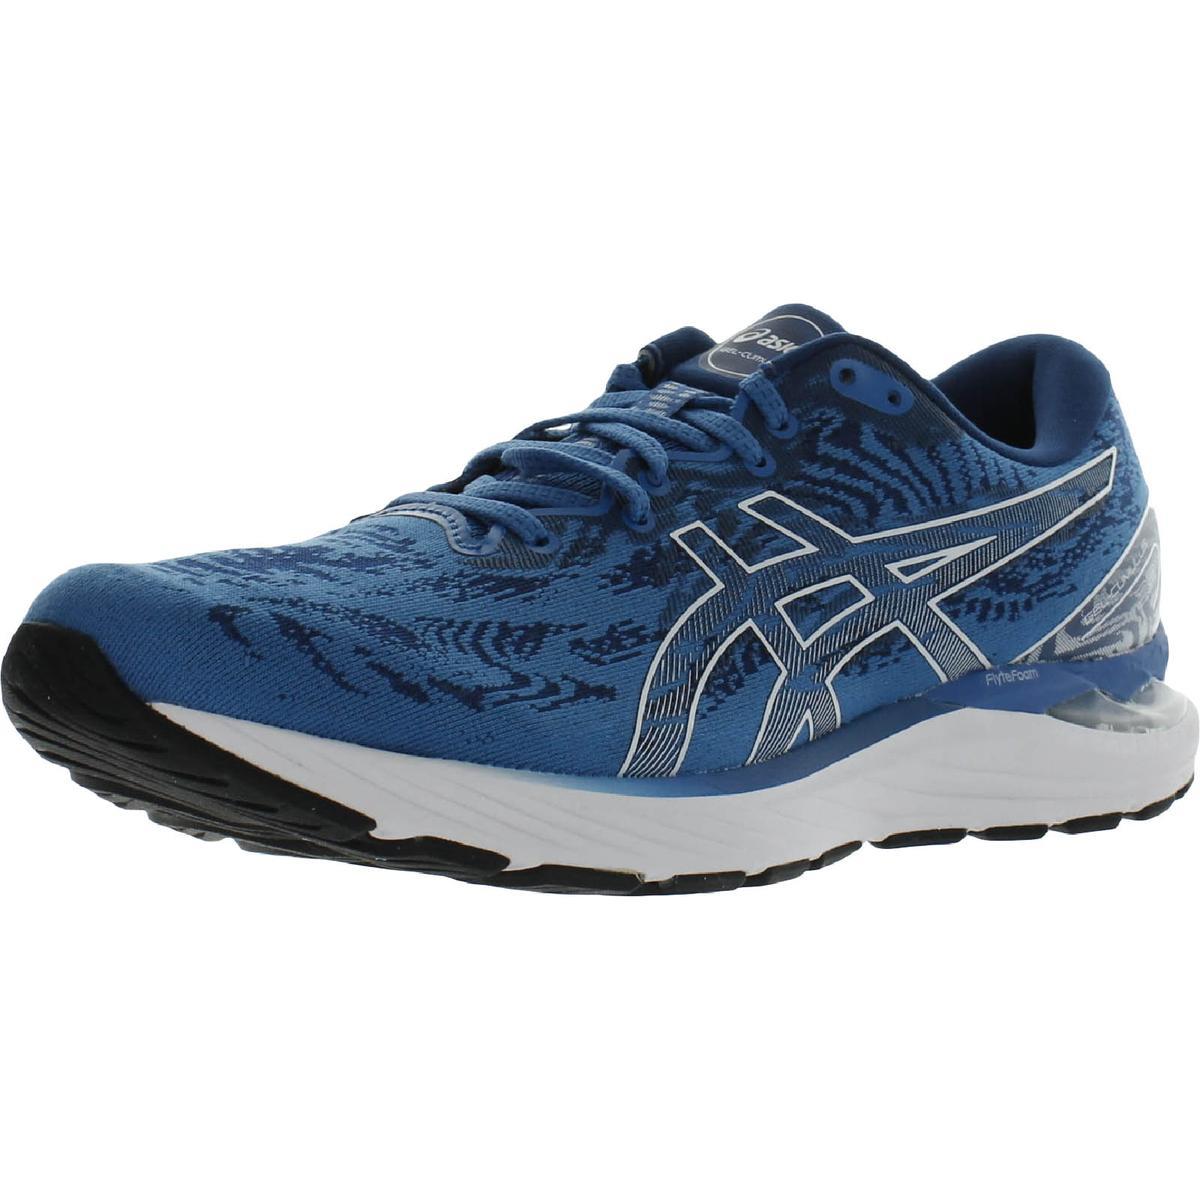 Asics Mens Gel Cumulus 23 Mesh Gym Trainers Running Shoes Sneakers Bhfo 6129 Reborn Blue/White